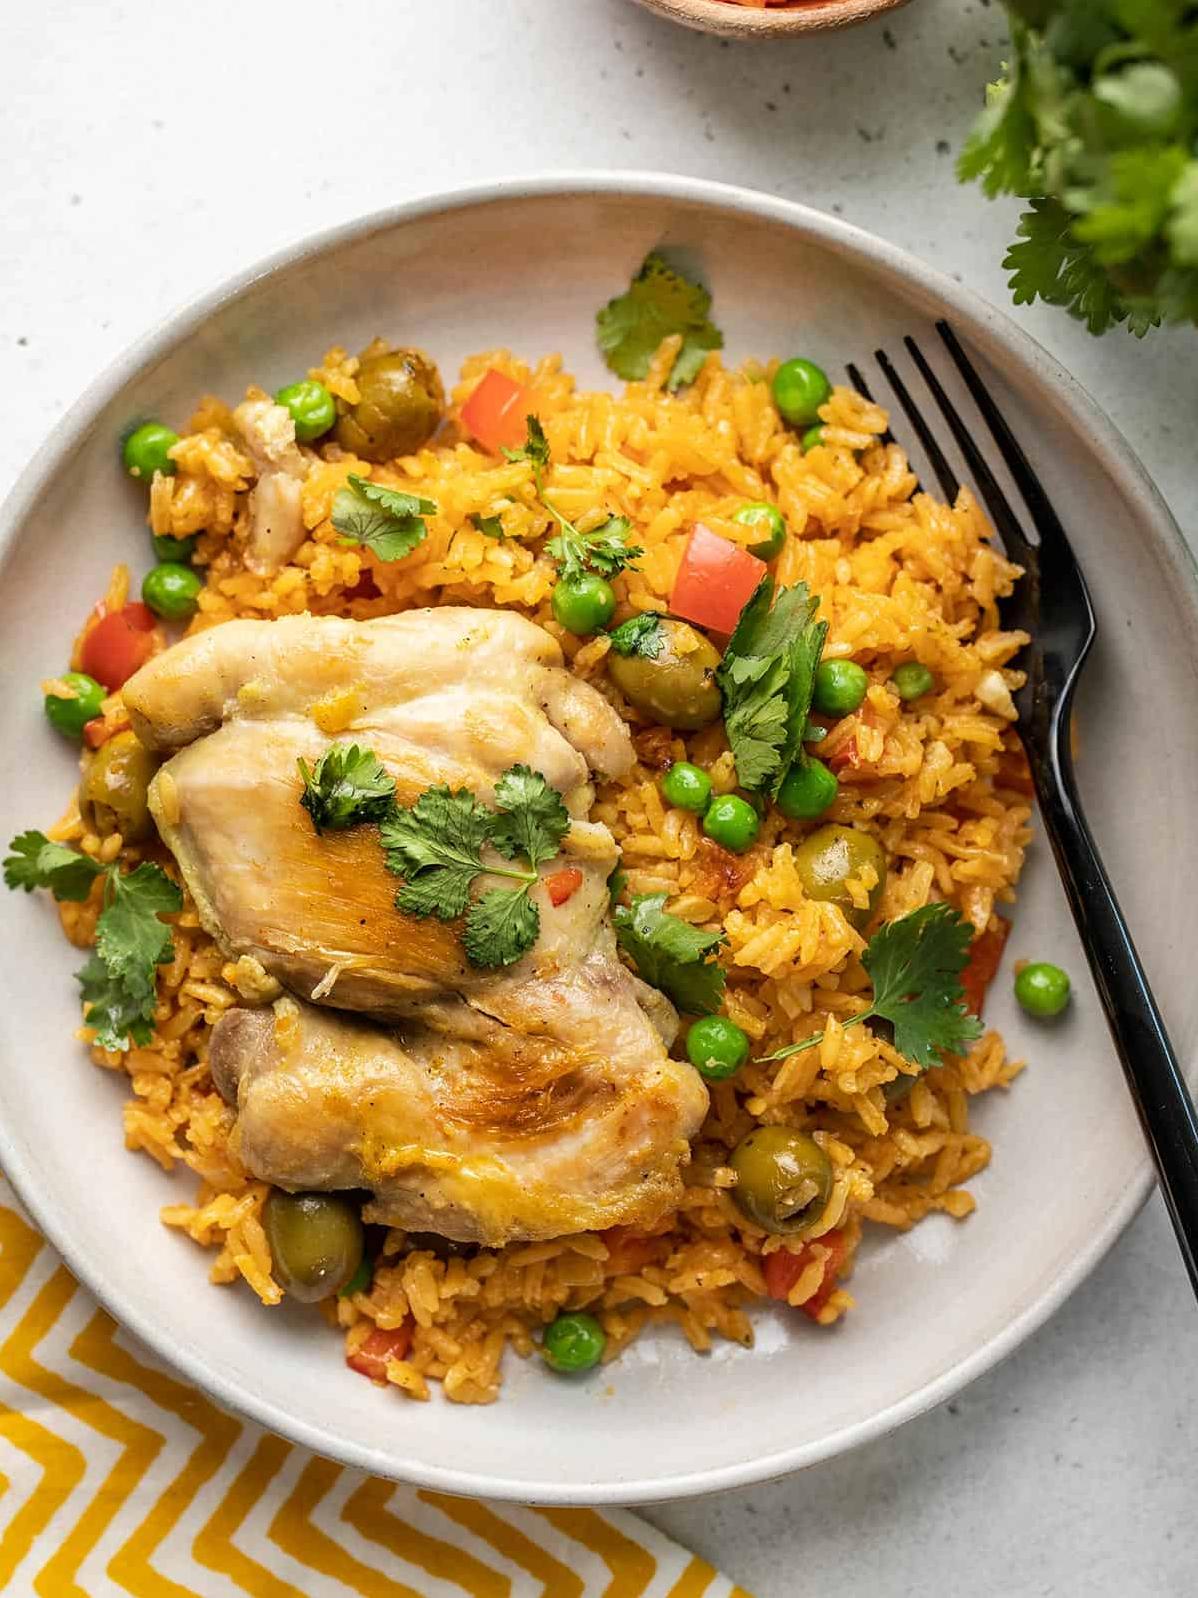  A spoonful of tender chicken and savory rice.